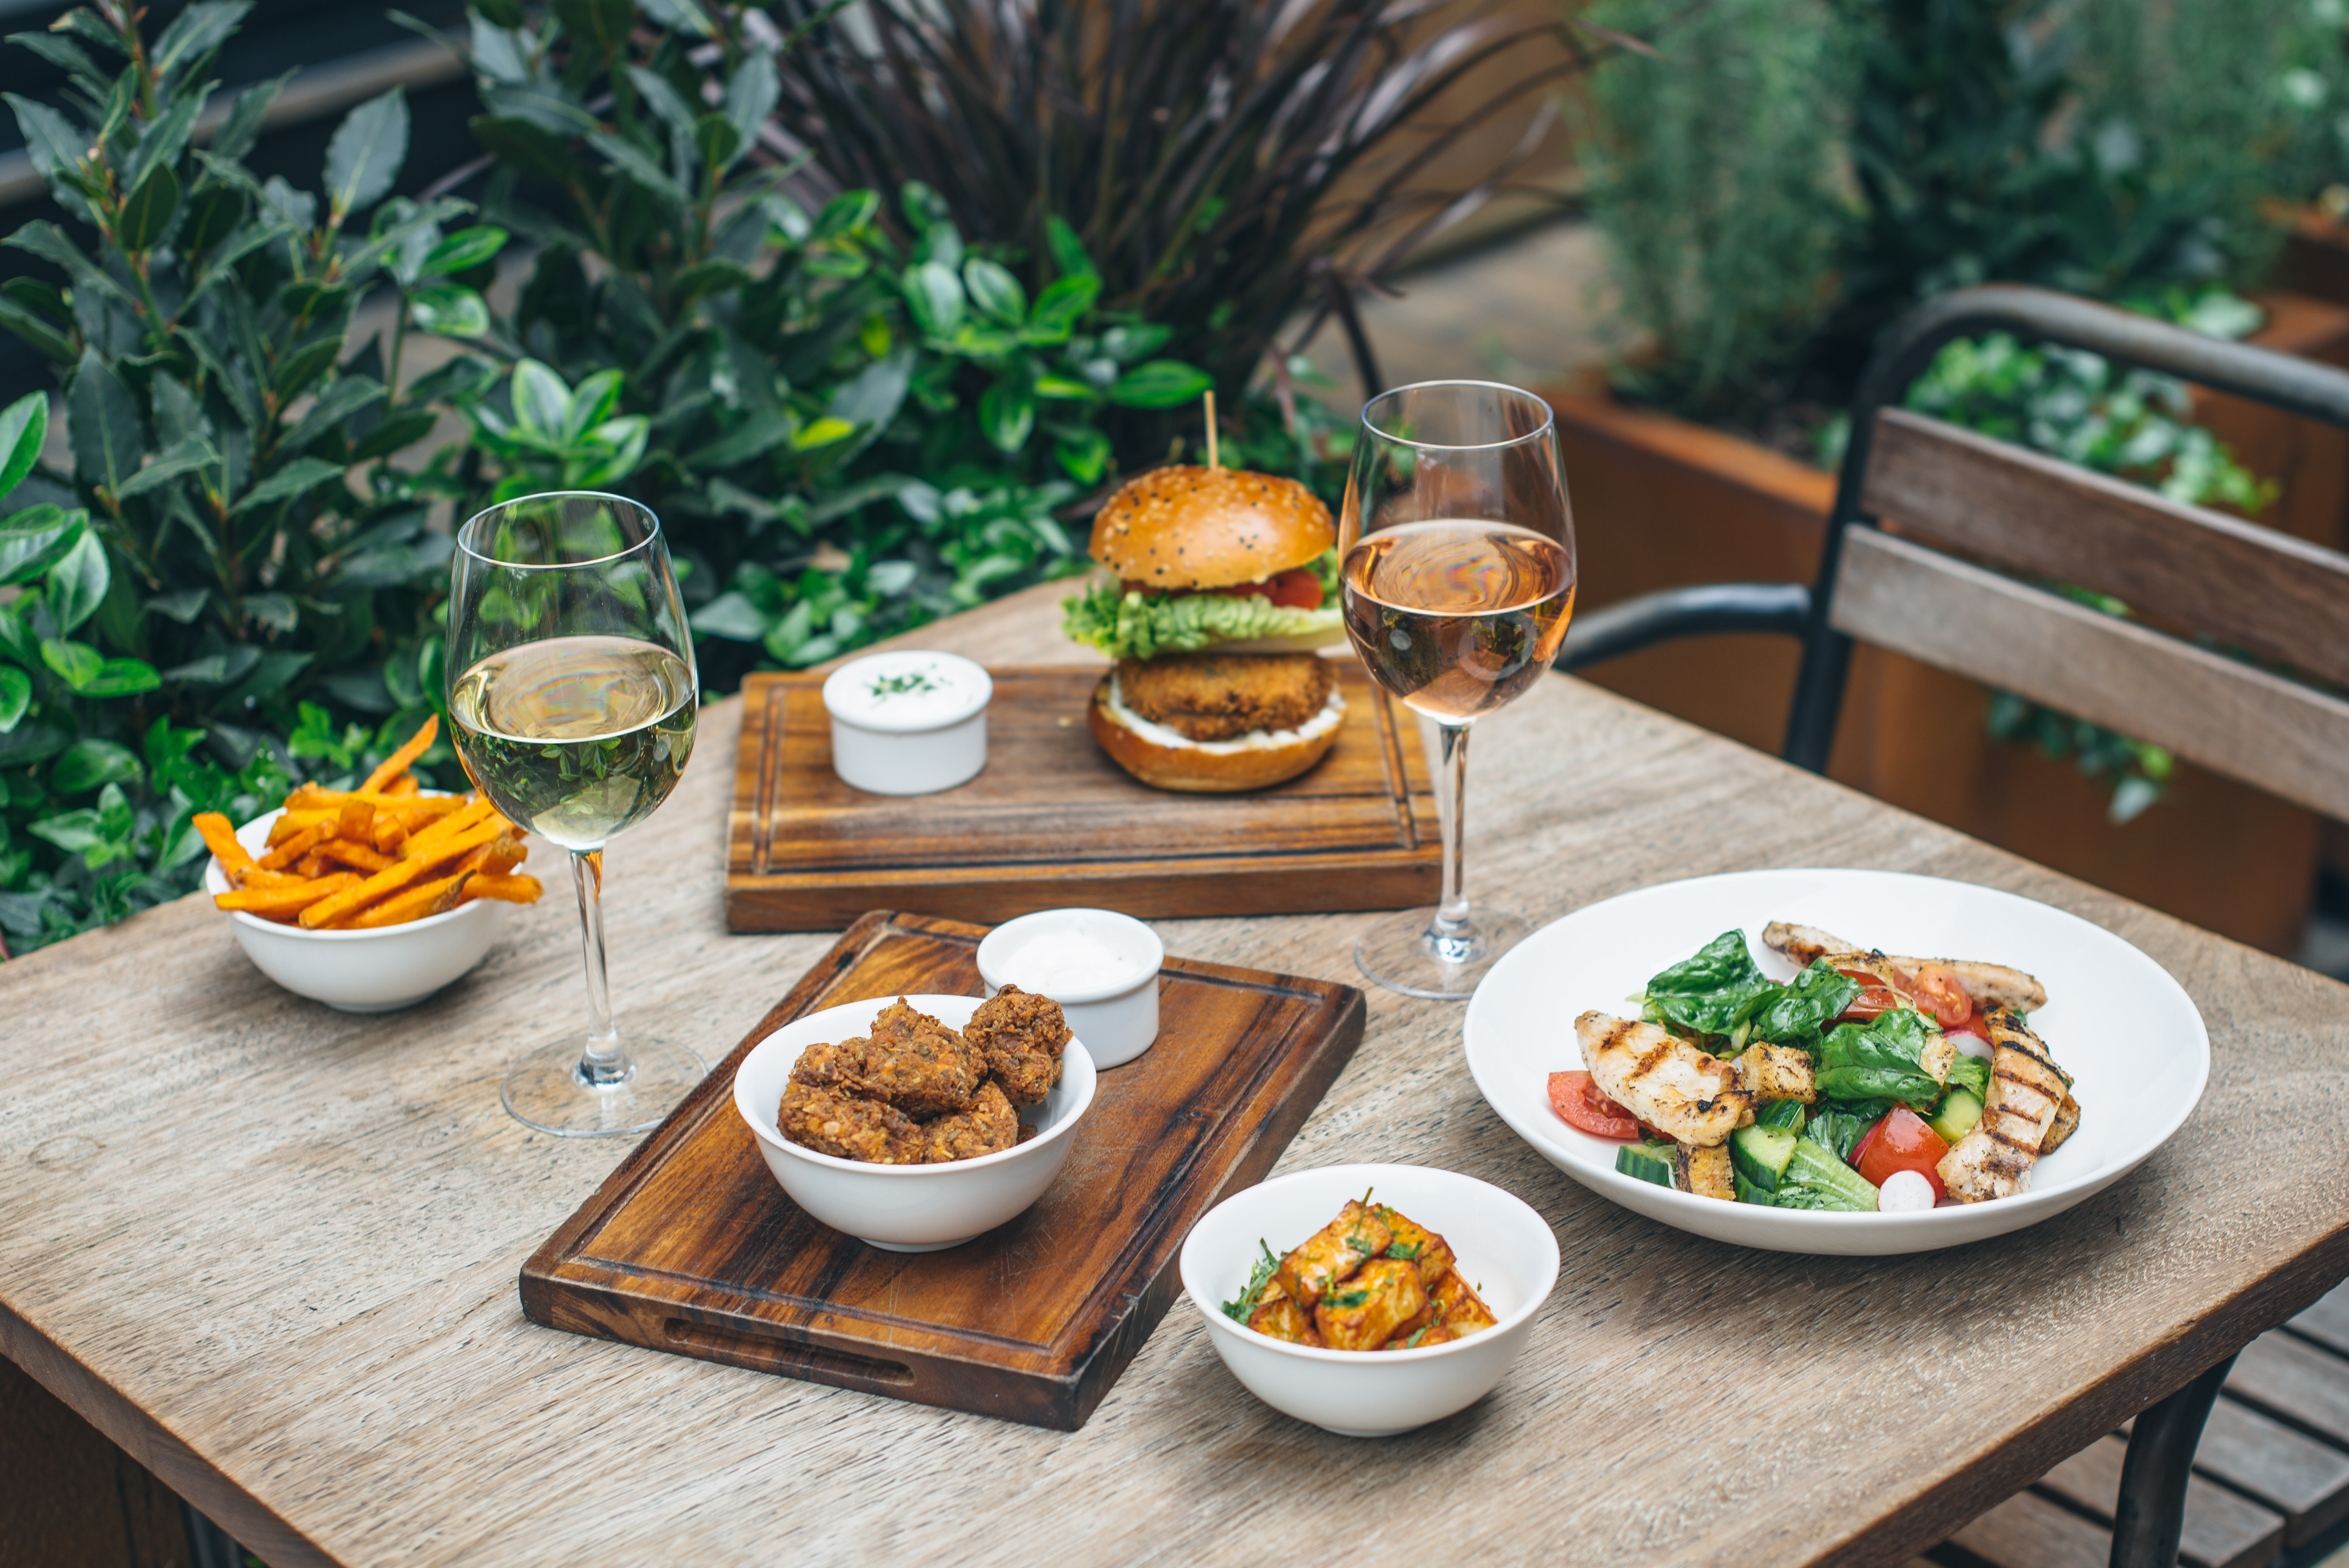 Free-range chicken burgers and salads with wine at Whyte and Brown, the free-range chicken restaurant in Kingly Court, Soho